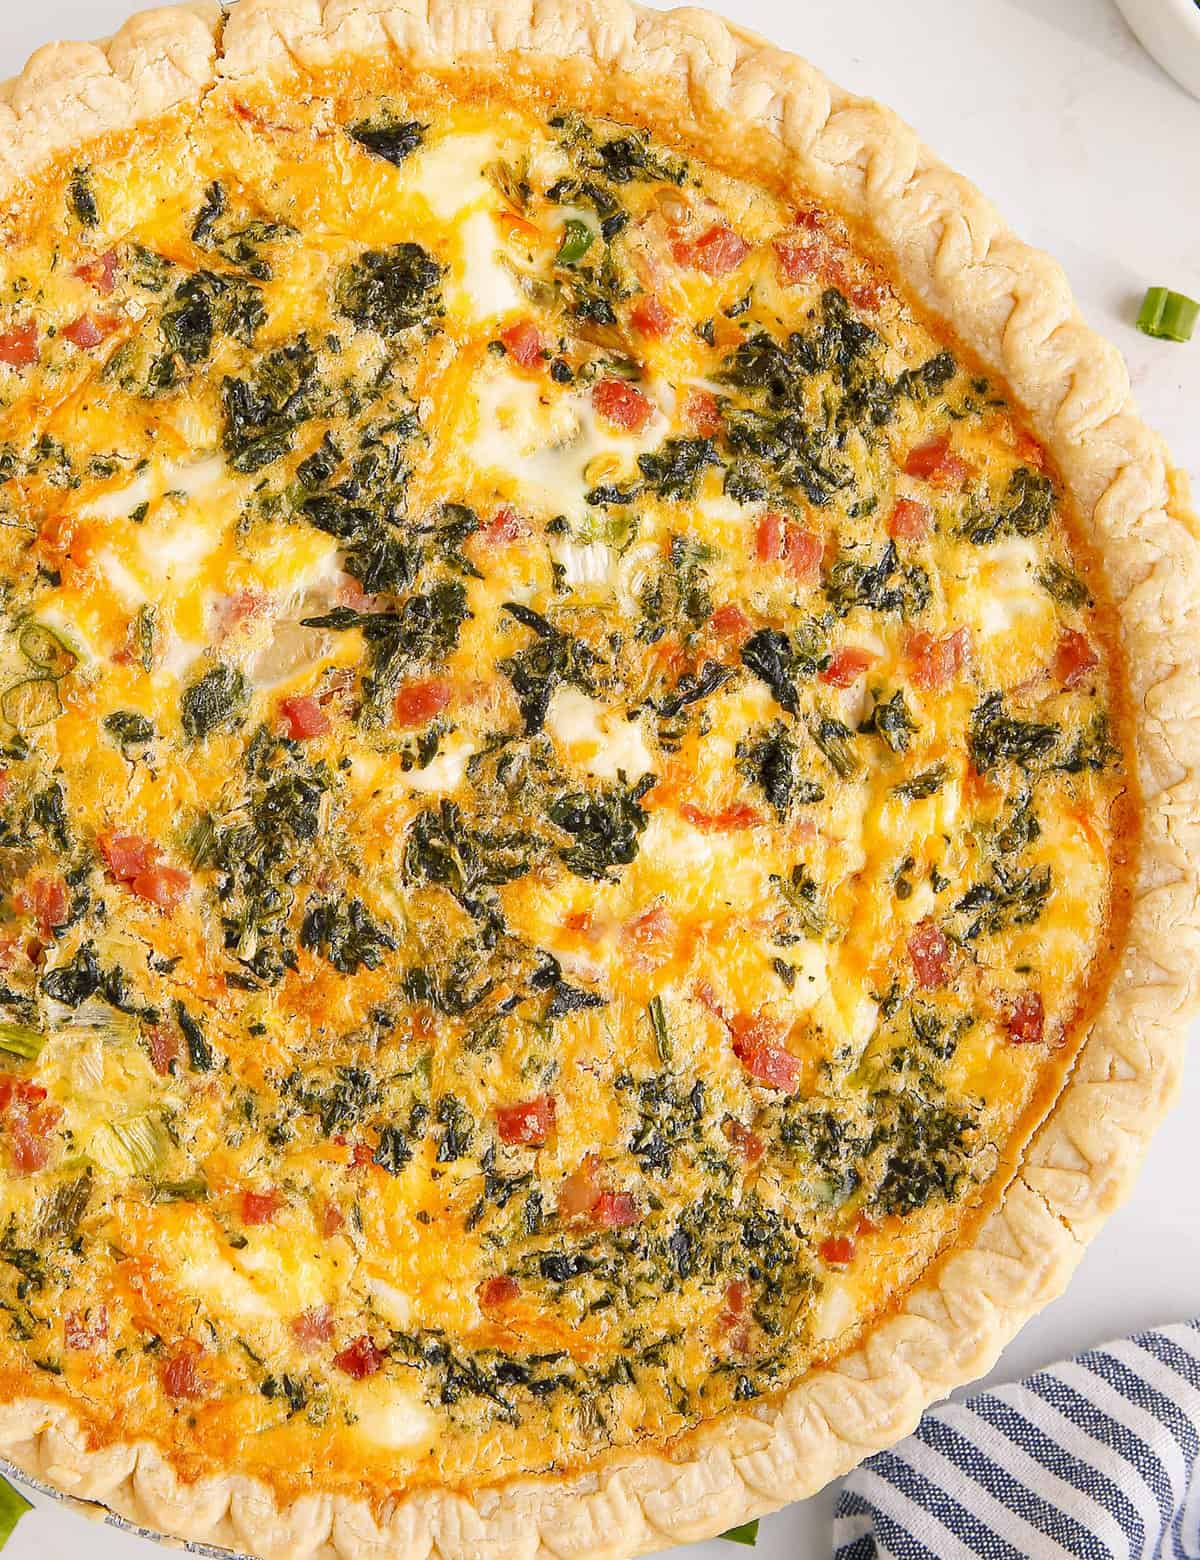 https://www.thechunkychef.com/wp-content/uploads/2023/03/Ham-and-Cheese-Quiche-Recipe-feat.jpg